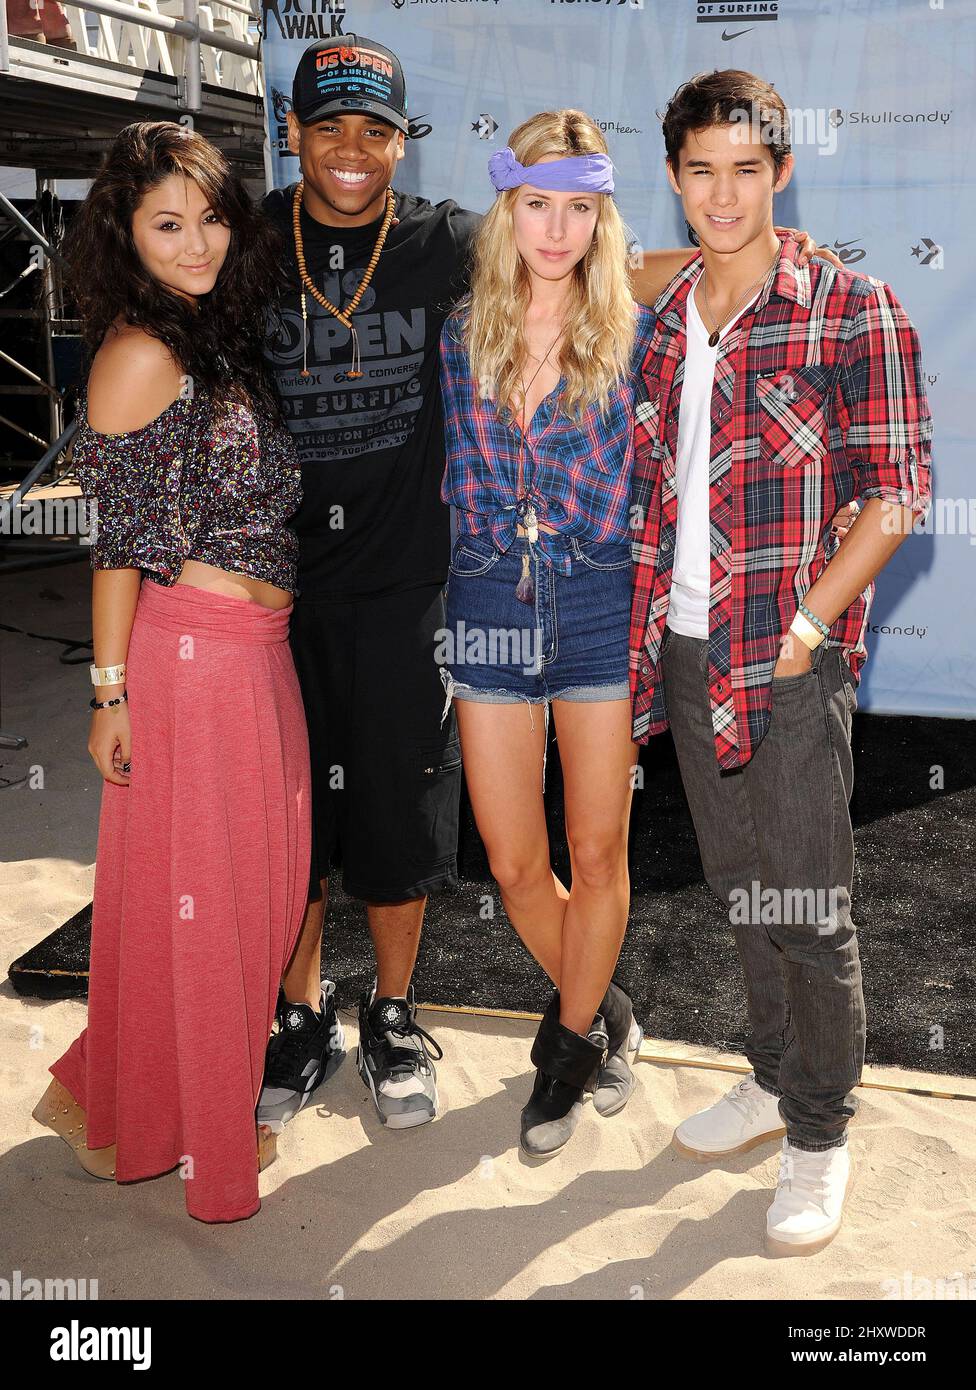 Fivel Stewart, Tristan Wilds, Gillian Zinser and Booboo Stewart during the 2011 Hurley Walk The Walk National Championship which is hosted By Vanessa Hudgens, California Stock Photo